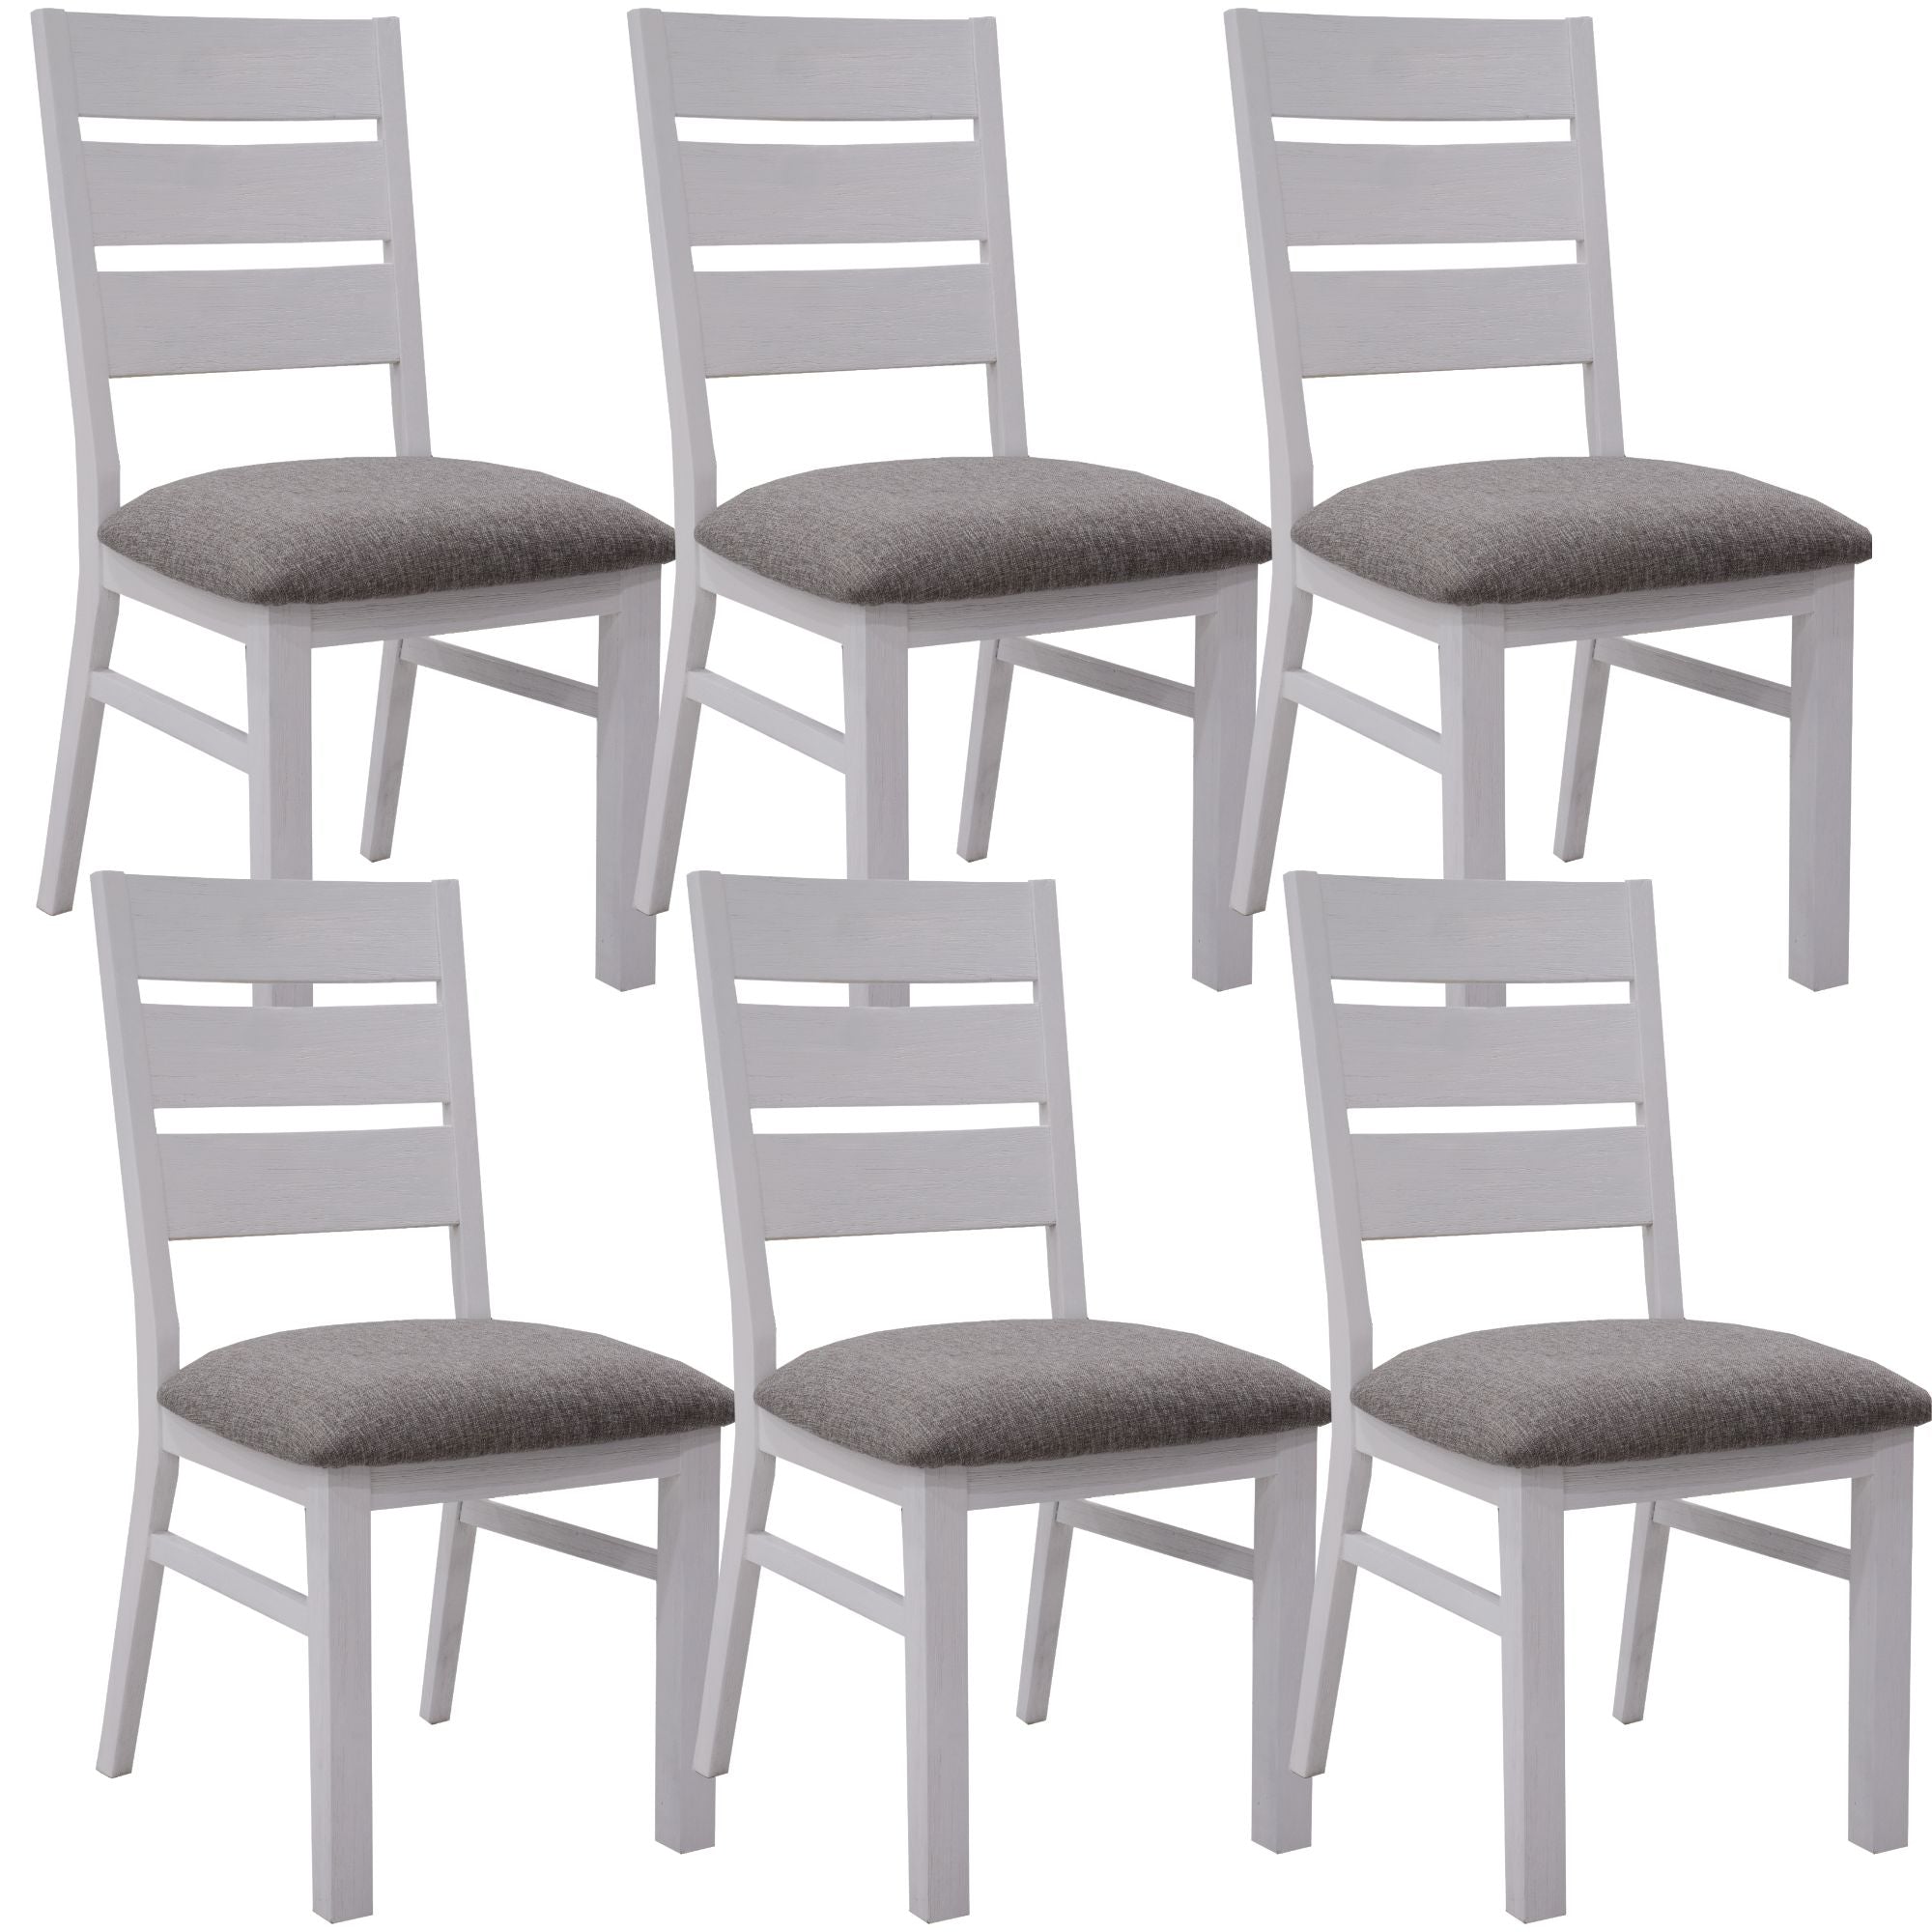 plumeria-dining-chair-set-of-6-solid-acacia-wood-dining-furniture-white-brush